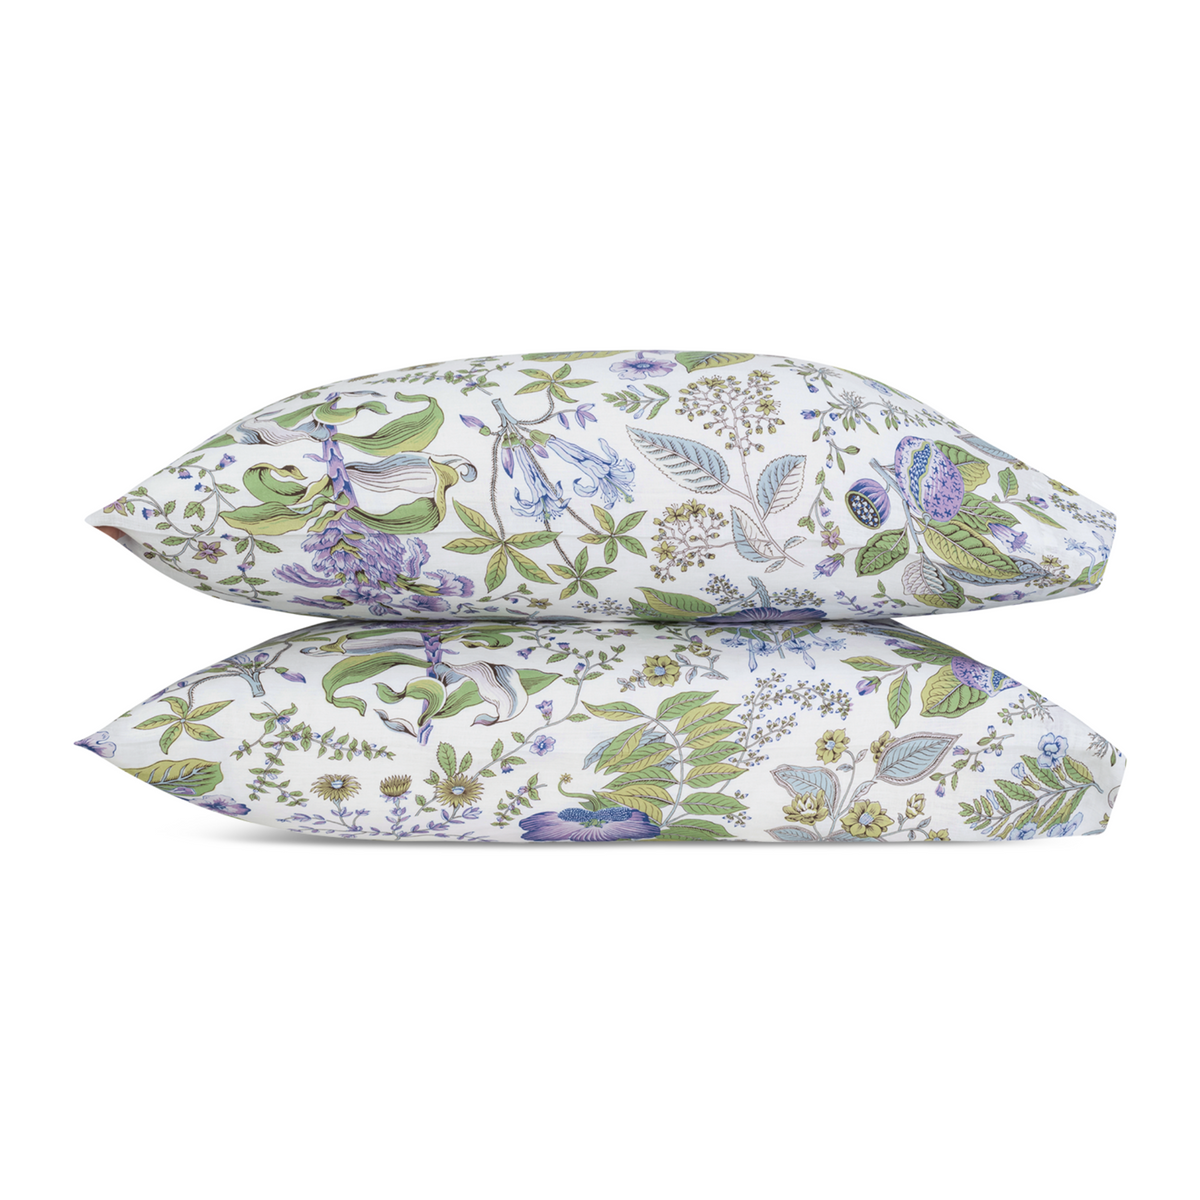 Pair of Pillowcases of Matouk Schumacher Pomegranate Linen Bedding in Lilac Color